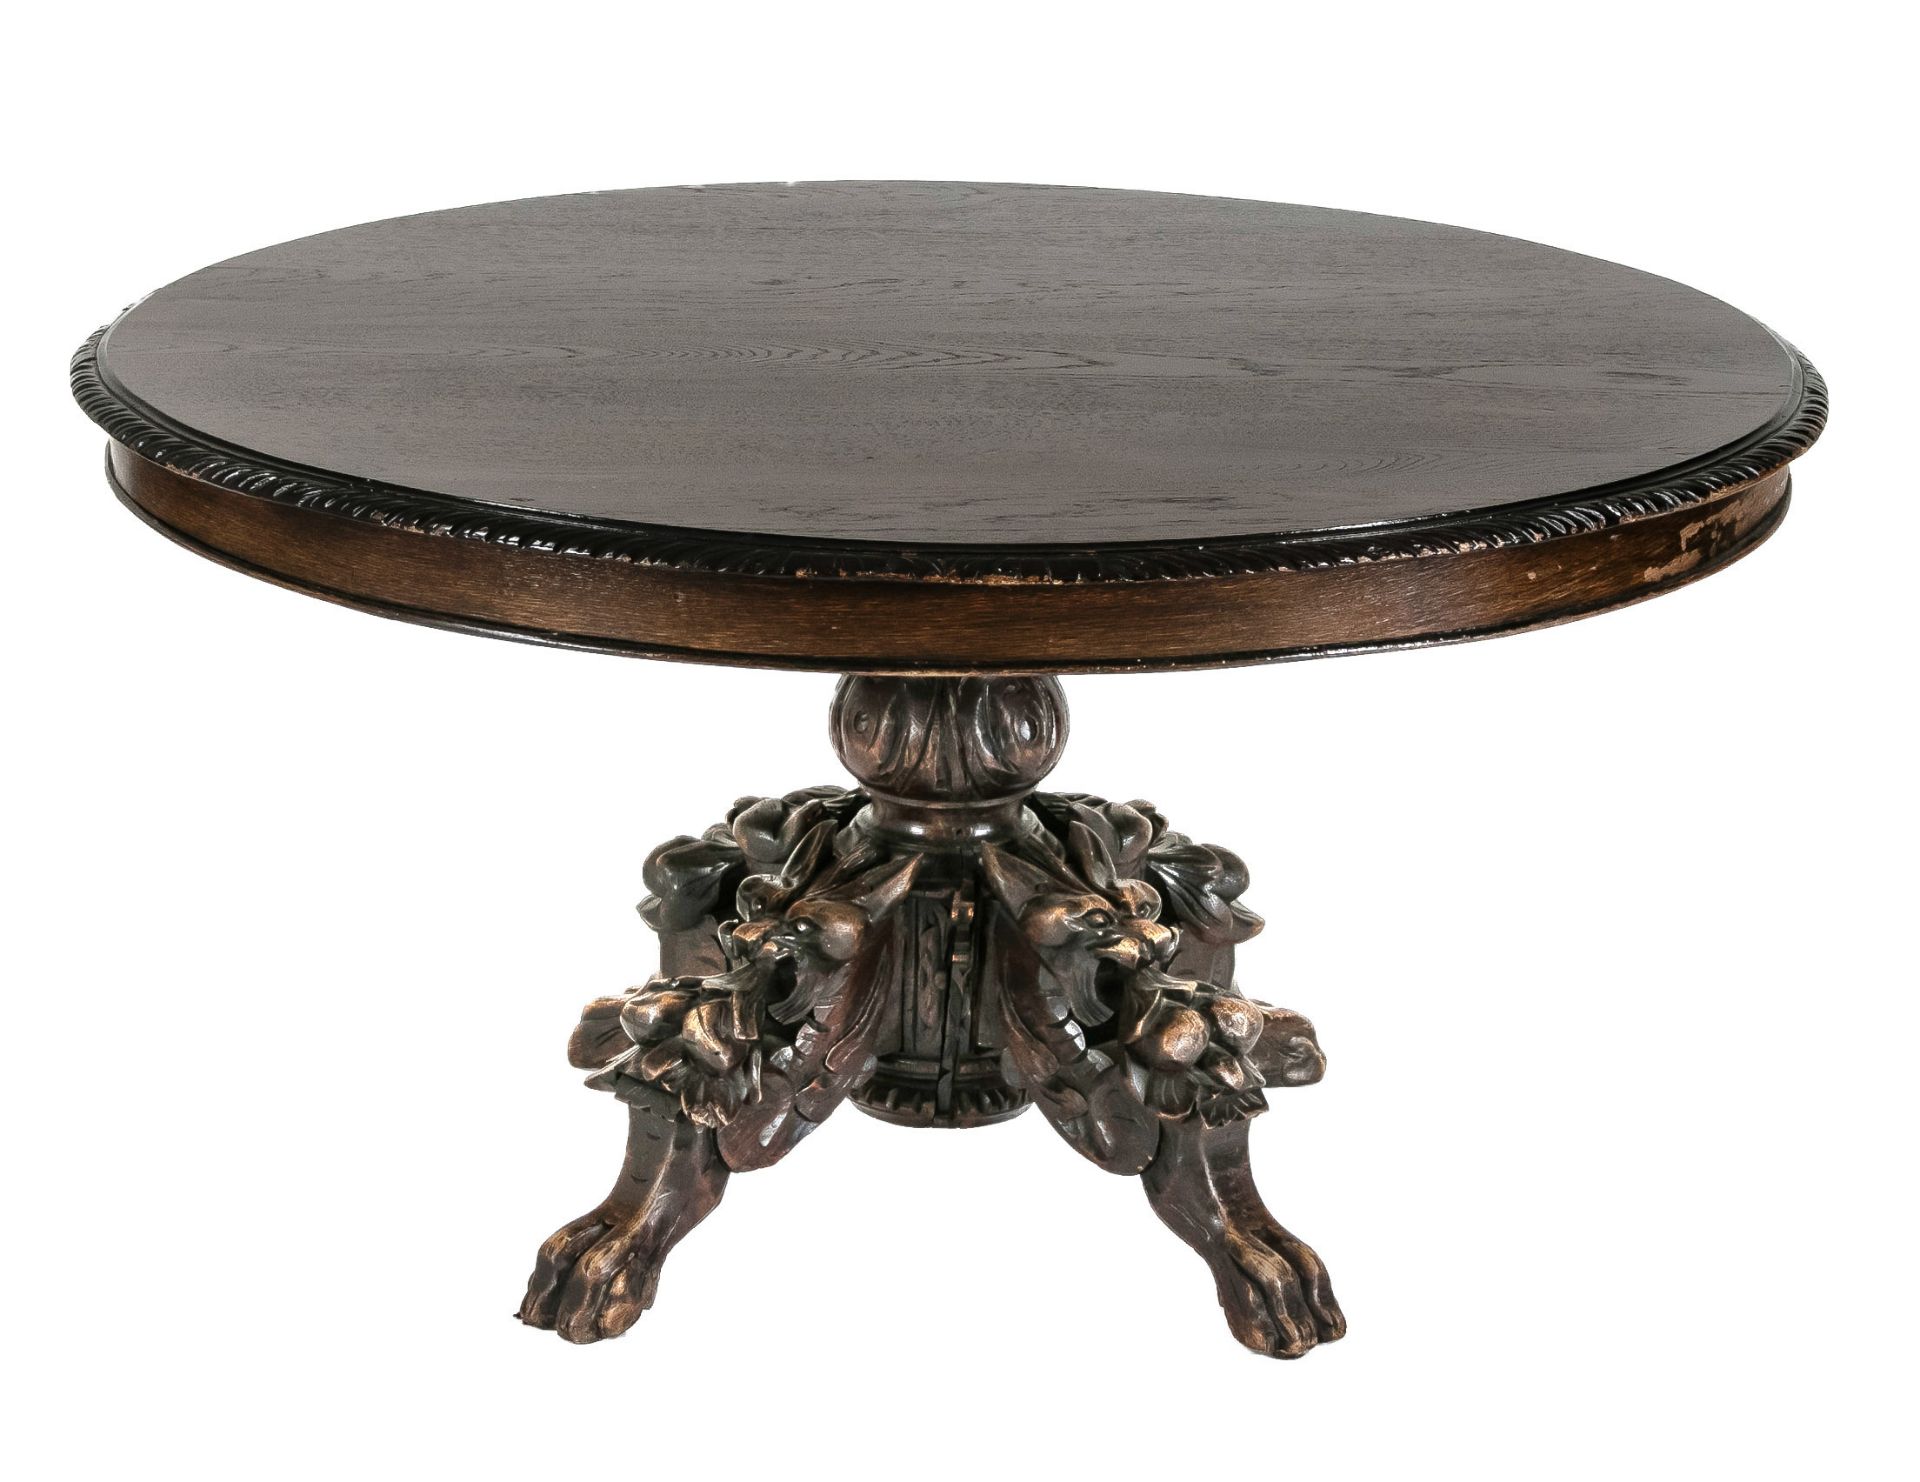 Oval salon table around 1870. solid oak, three richly carved feet in the shape of foxes, 60 x 114